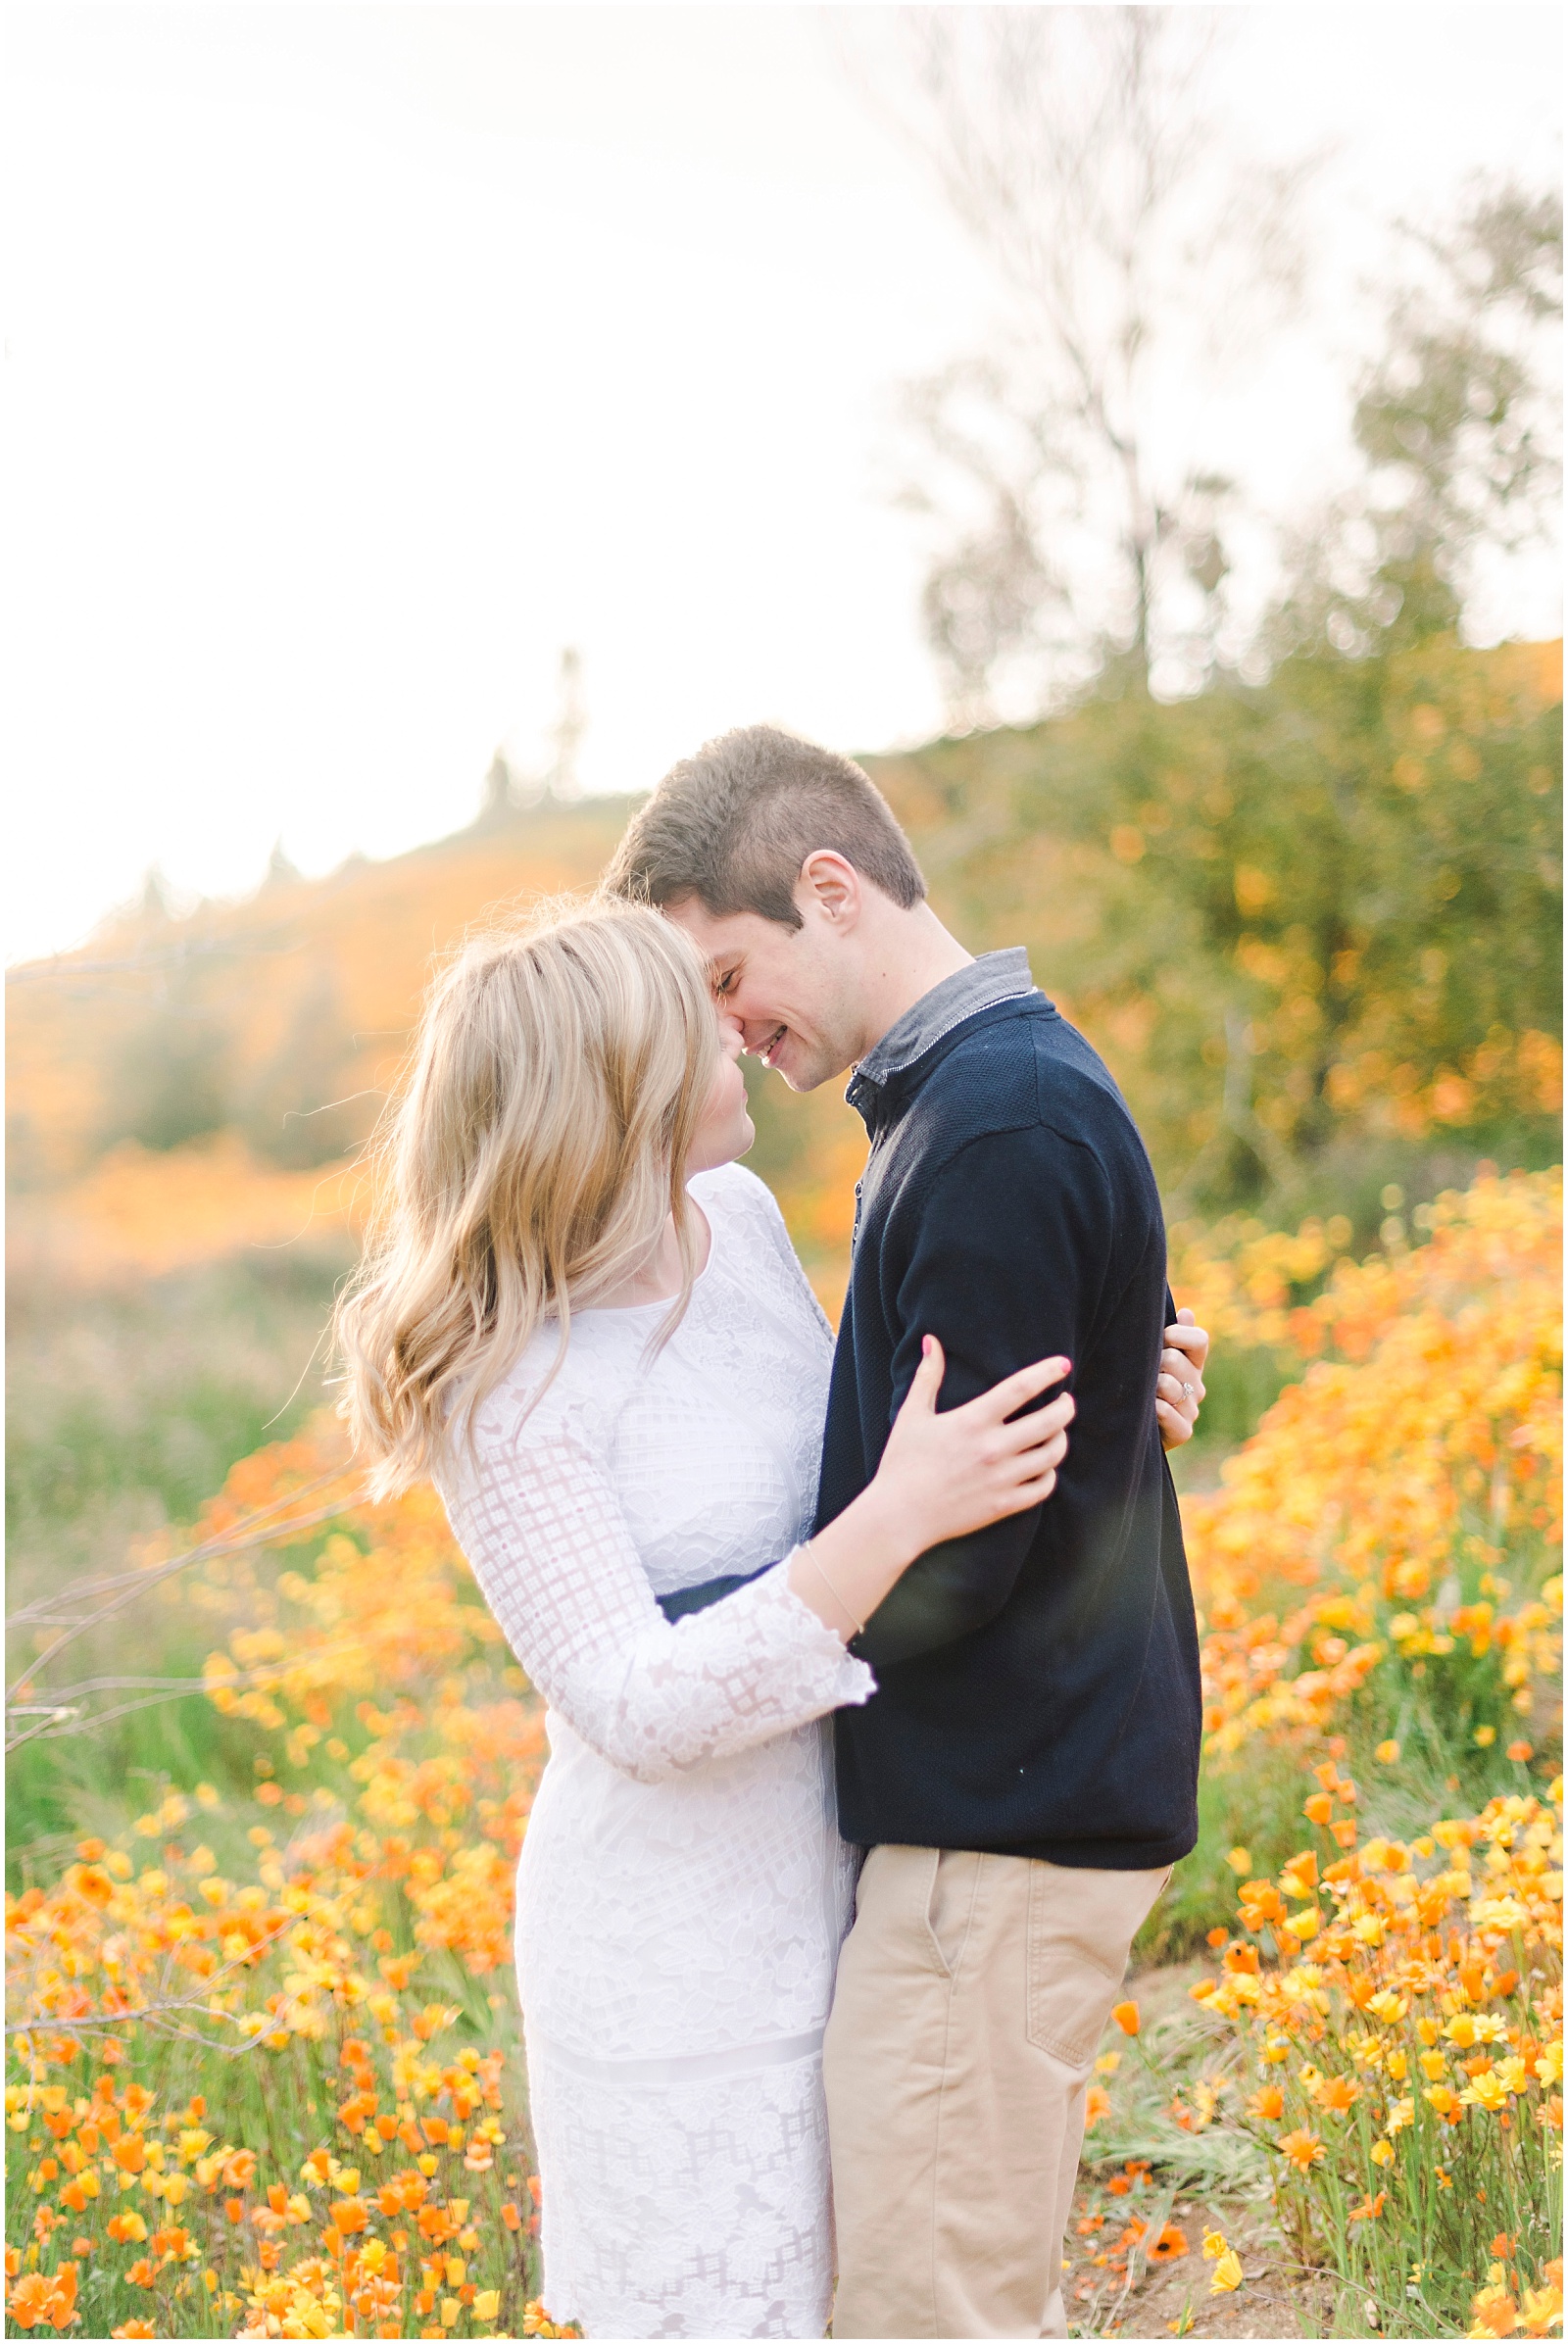 Yucaipa Superbloom Engagement Session by Mollie Jane Photography.  To see more go to www.molliejanephotography.com